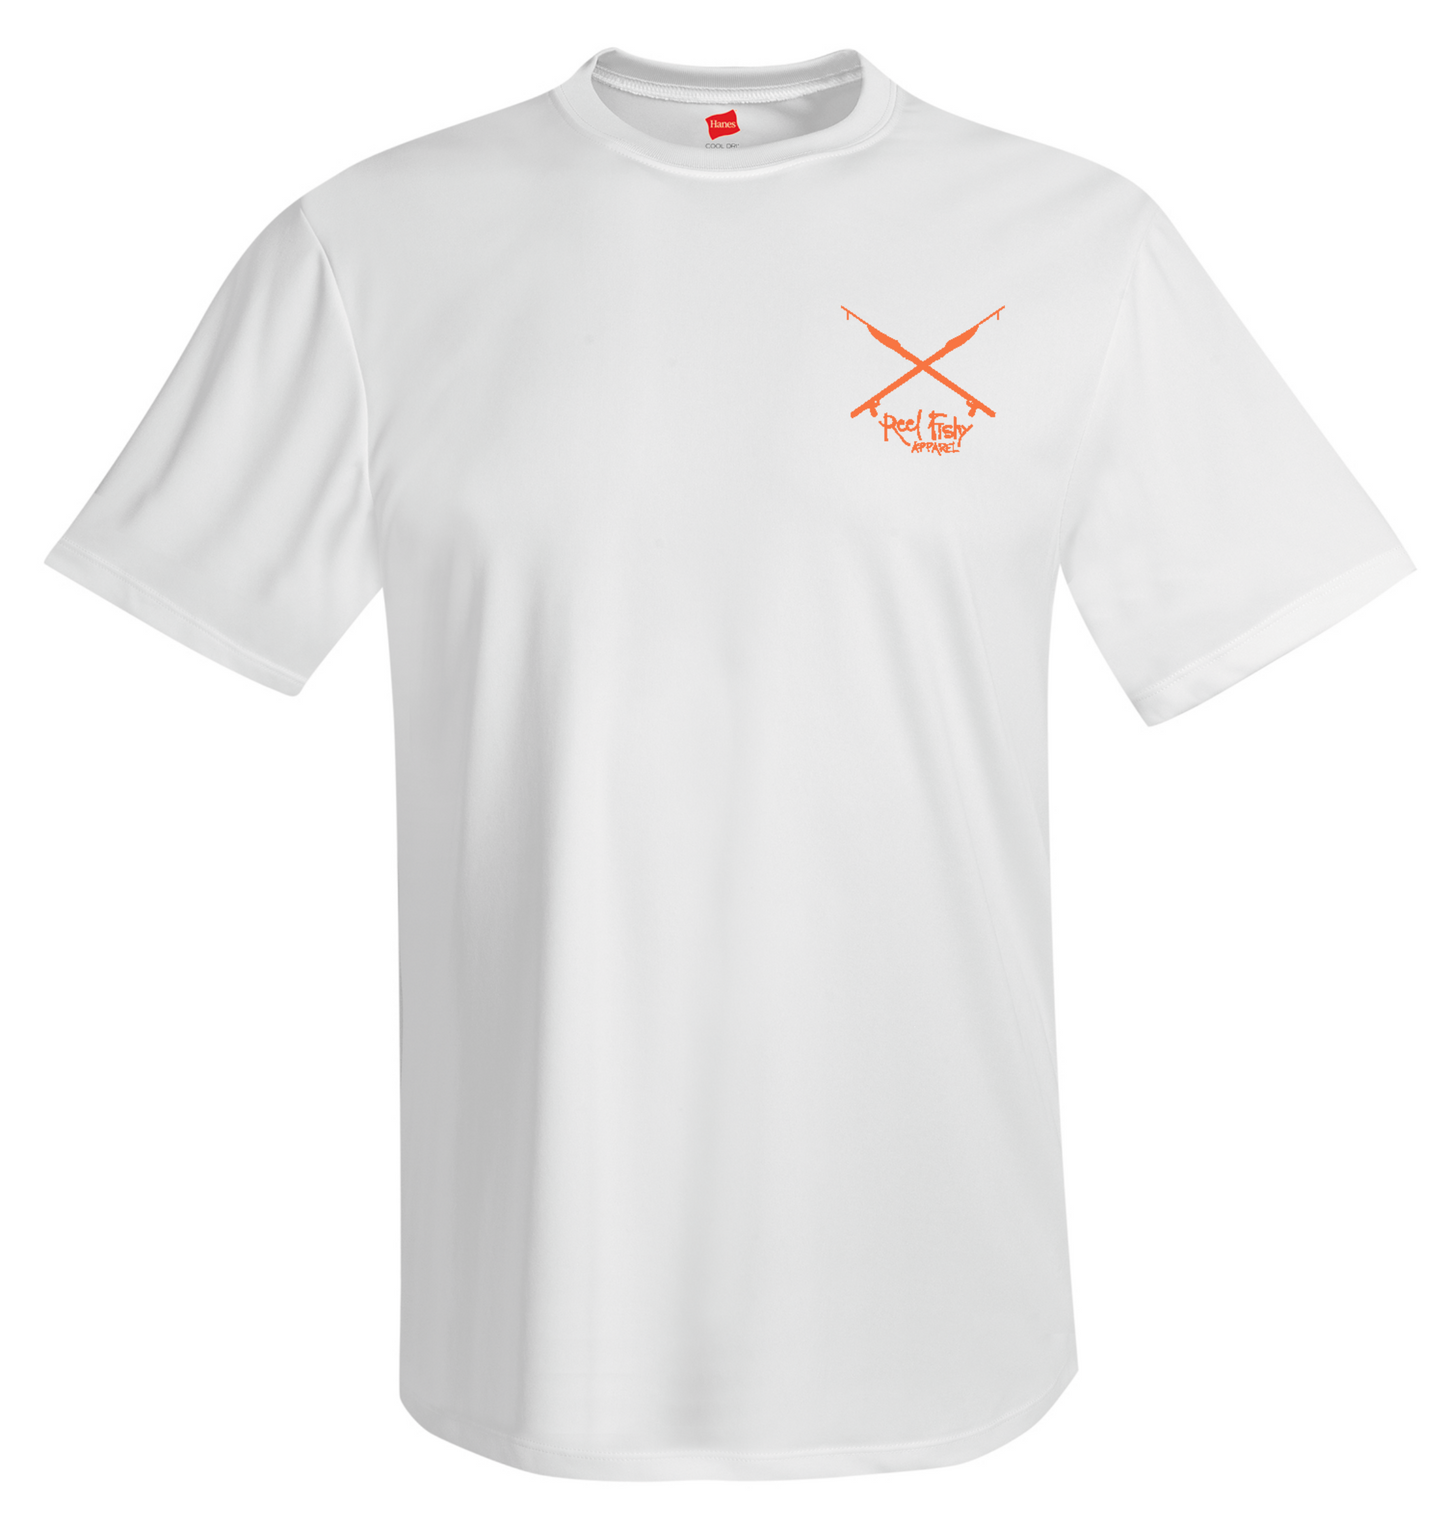 Octopus Performance Dry-Fit Short Sleeve - Front White w/Orange Reel Fishy Spears logo